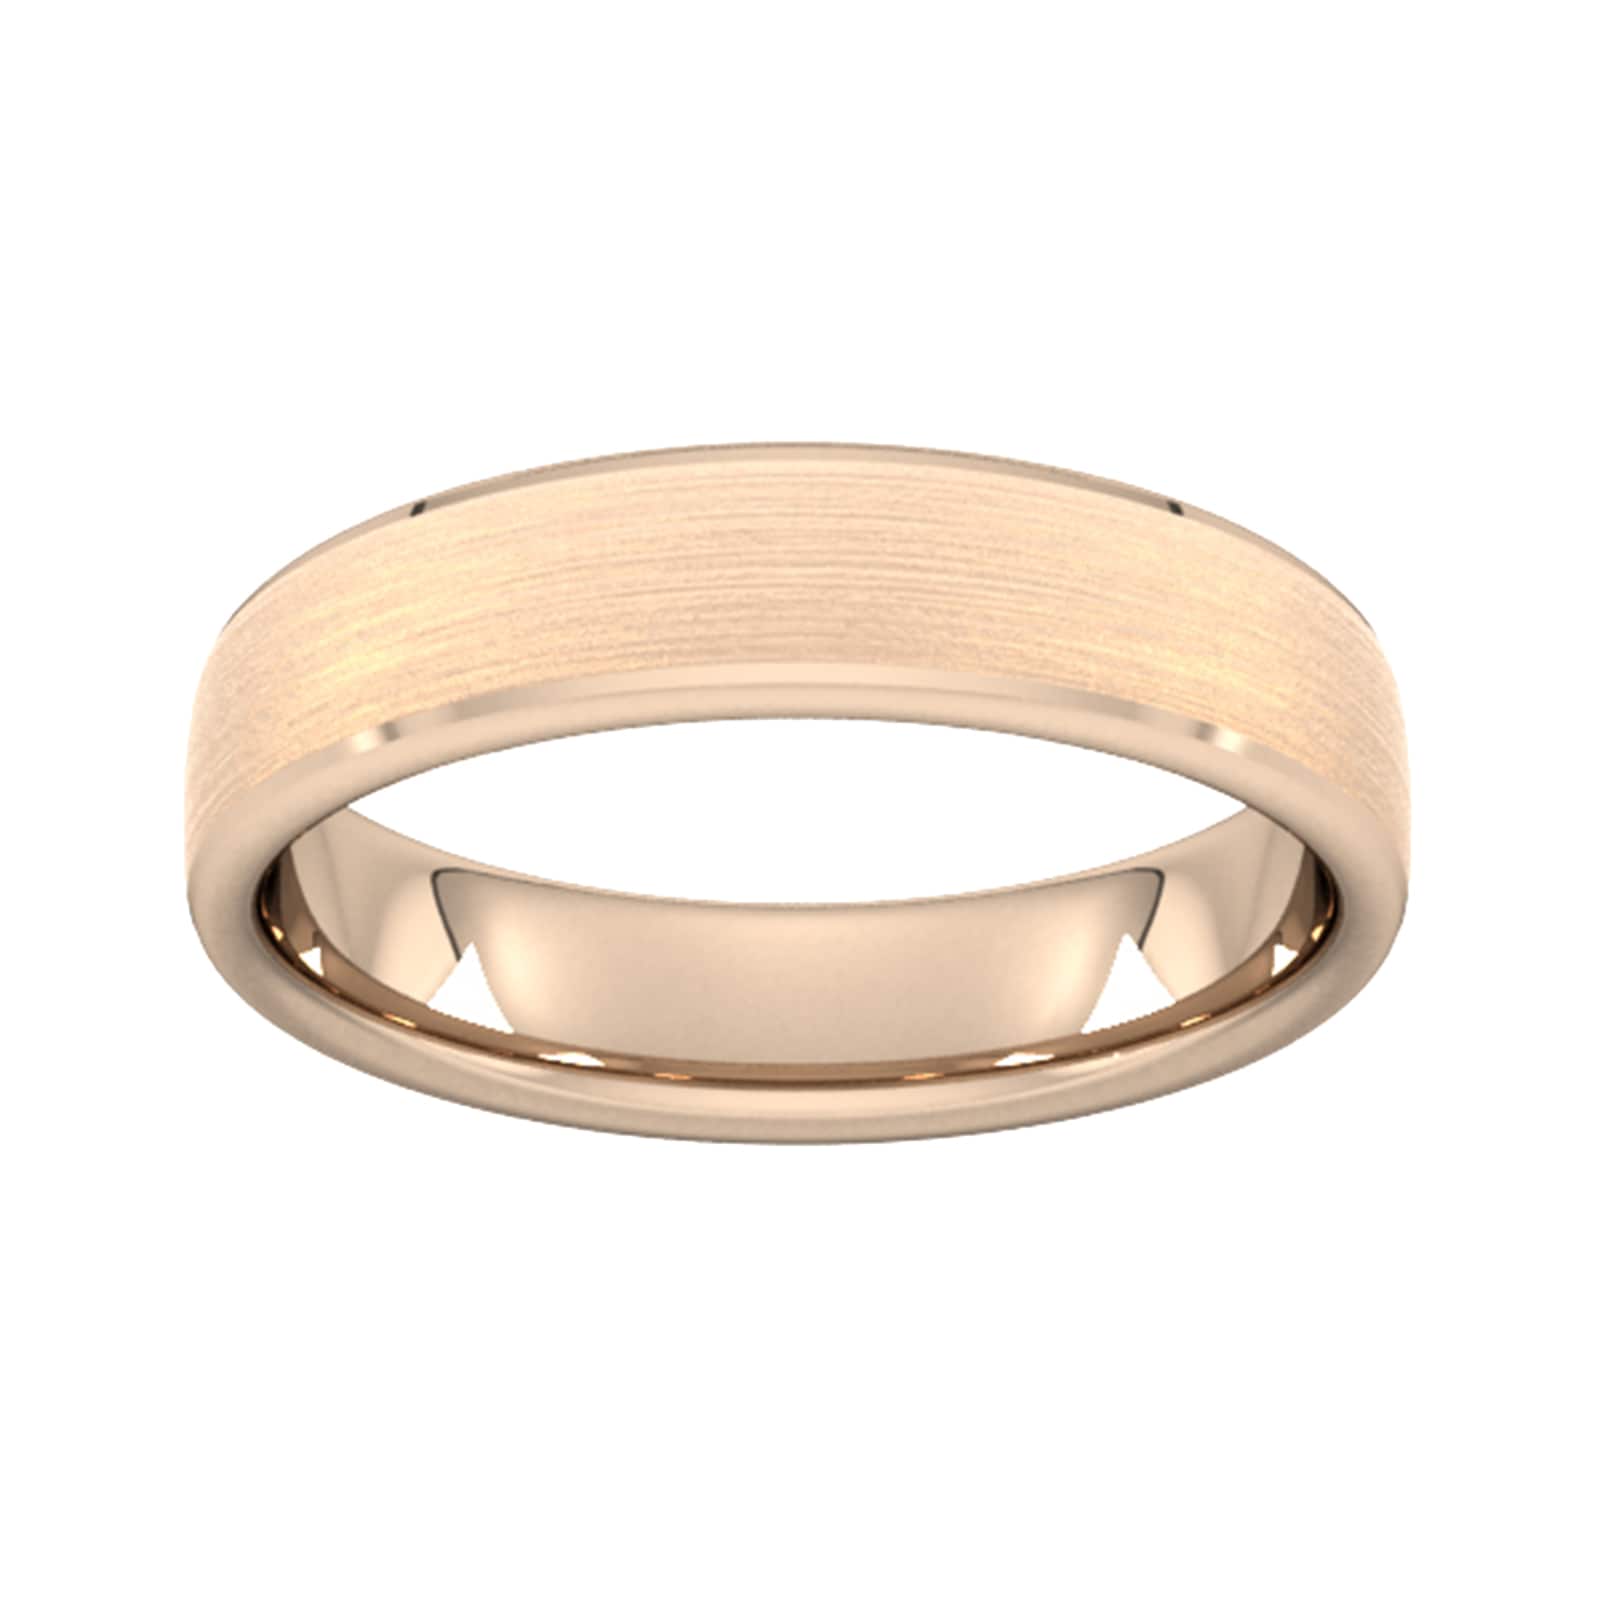 5mm D Shape Standard Polished Chamfered Edges With Matt Centre Wedding Ring In 9 Carat Rose Gold - Ring Size U